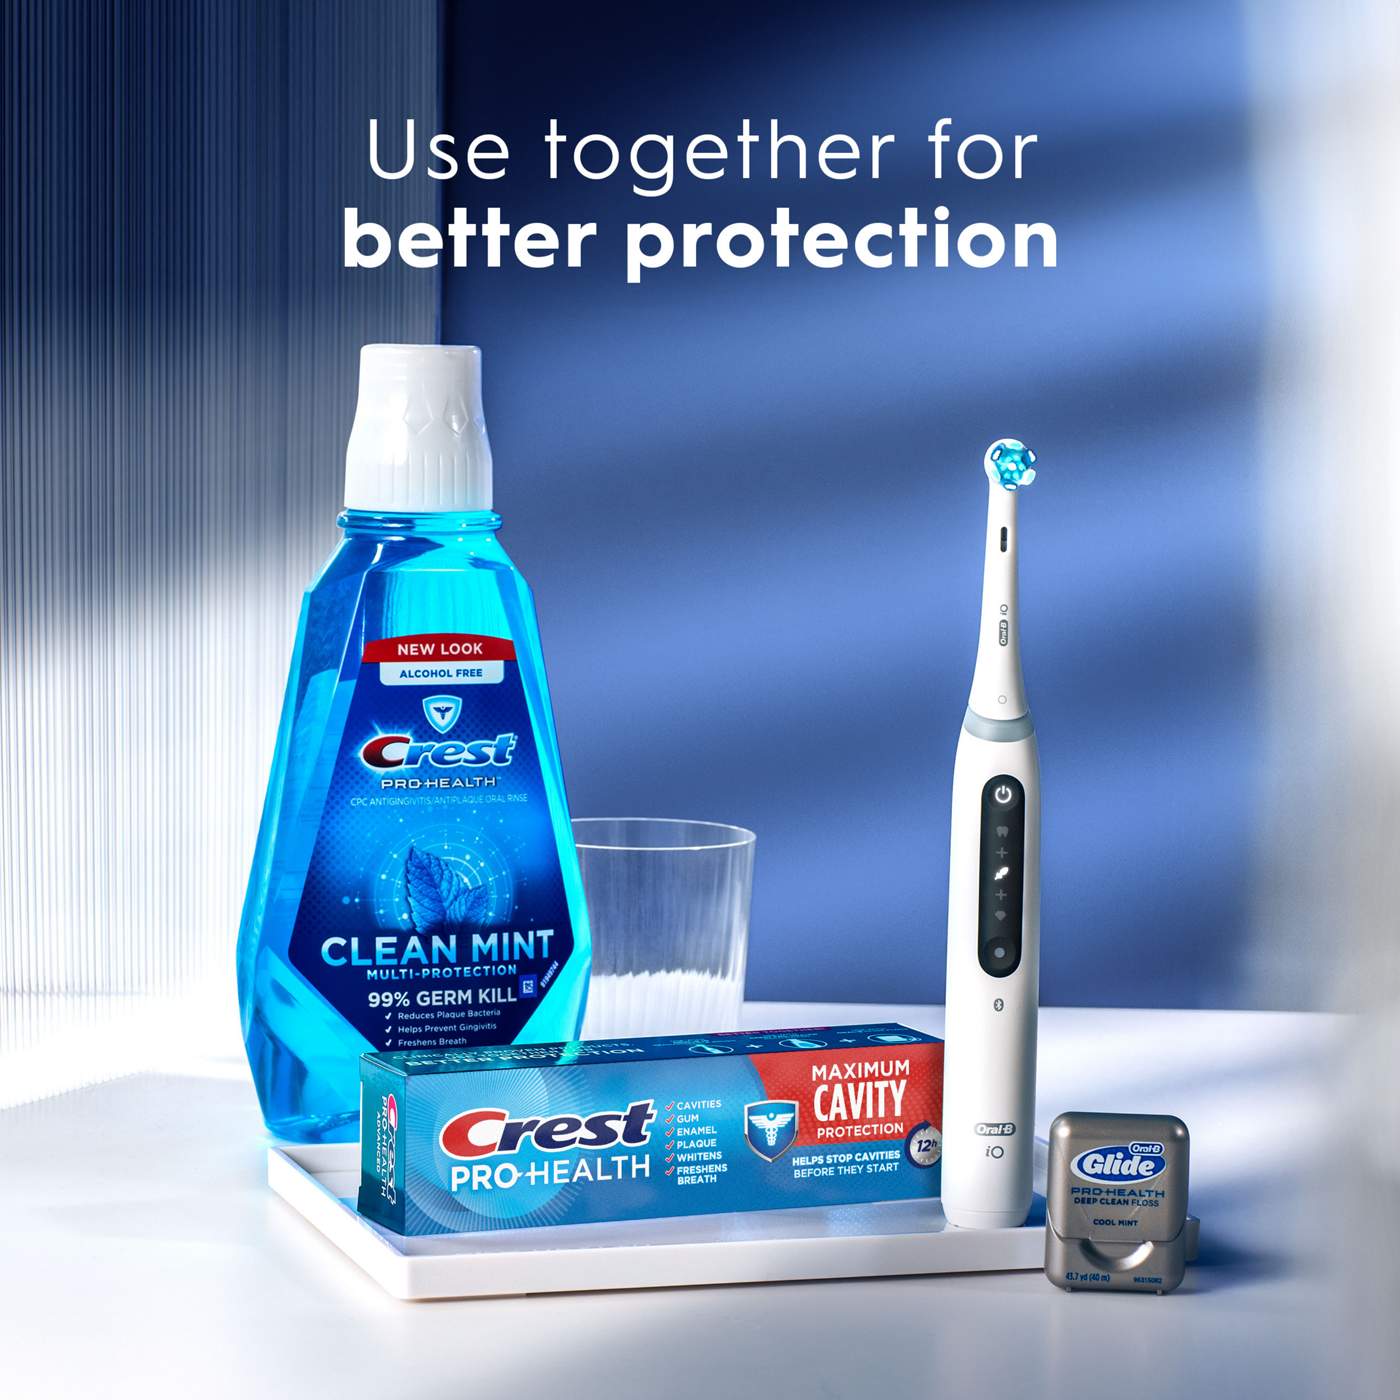 Crest Pro Health Maximum Cavity Protection Toothpaste; image 5 of 5